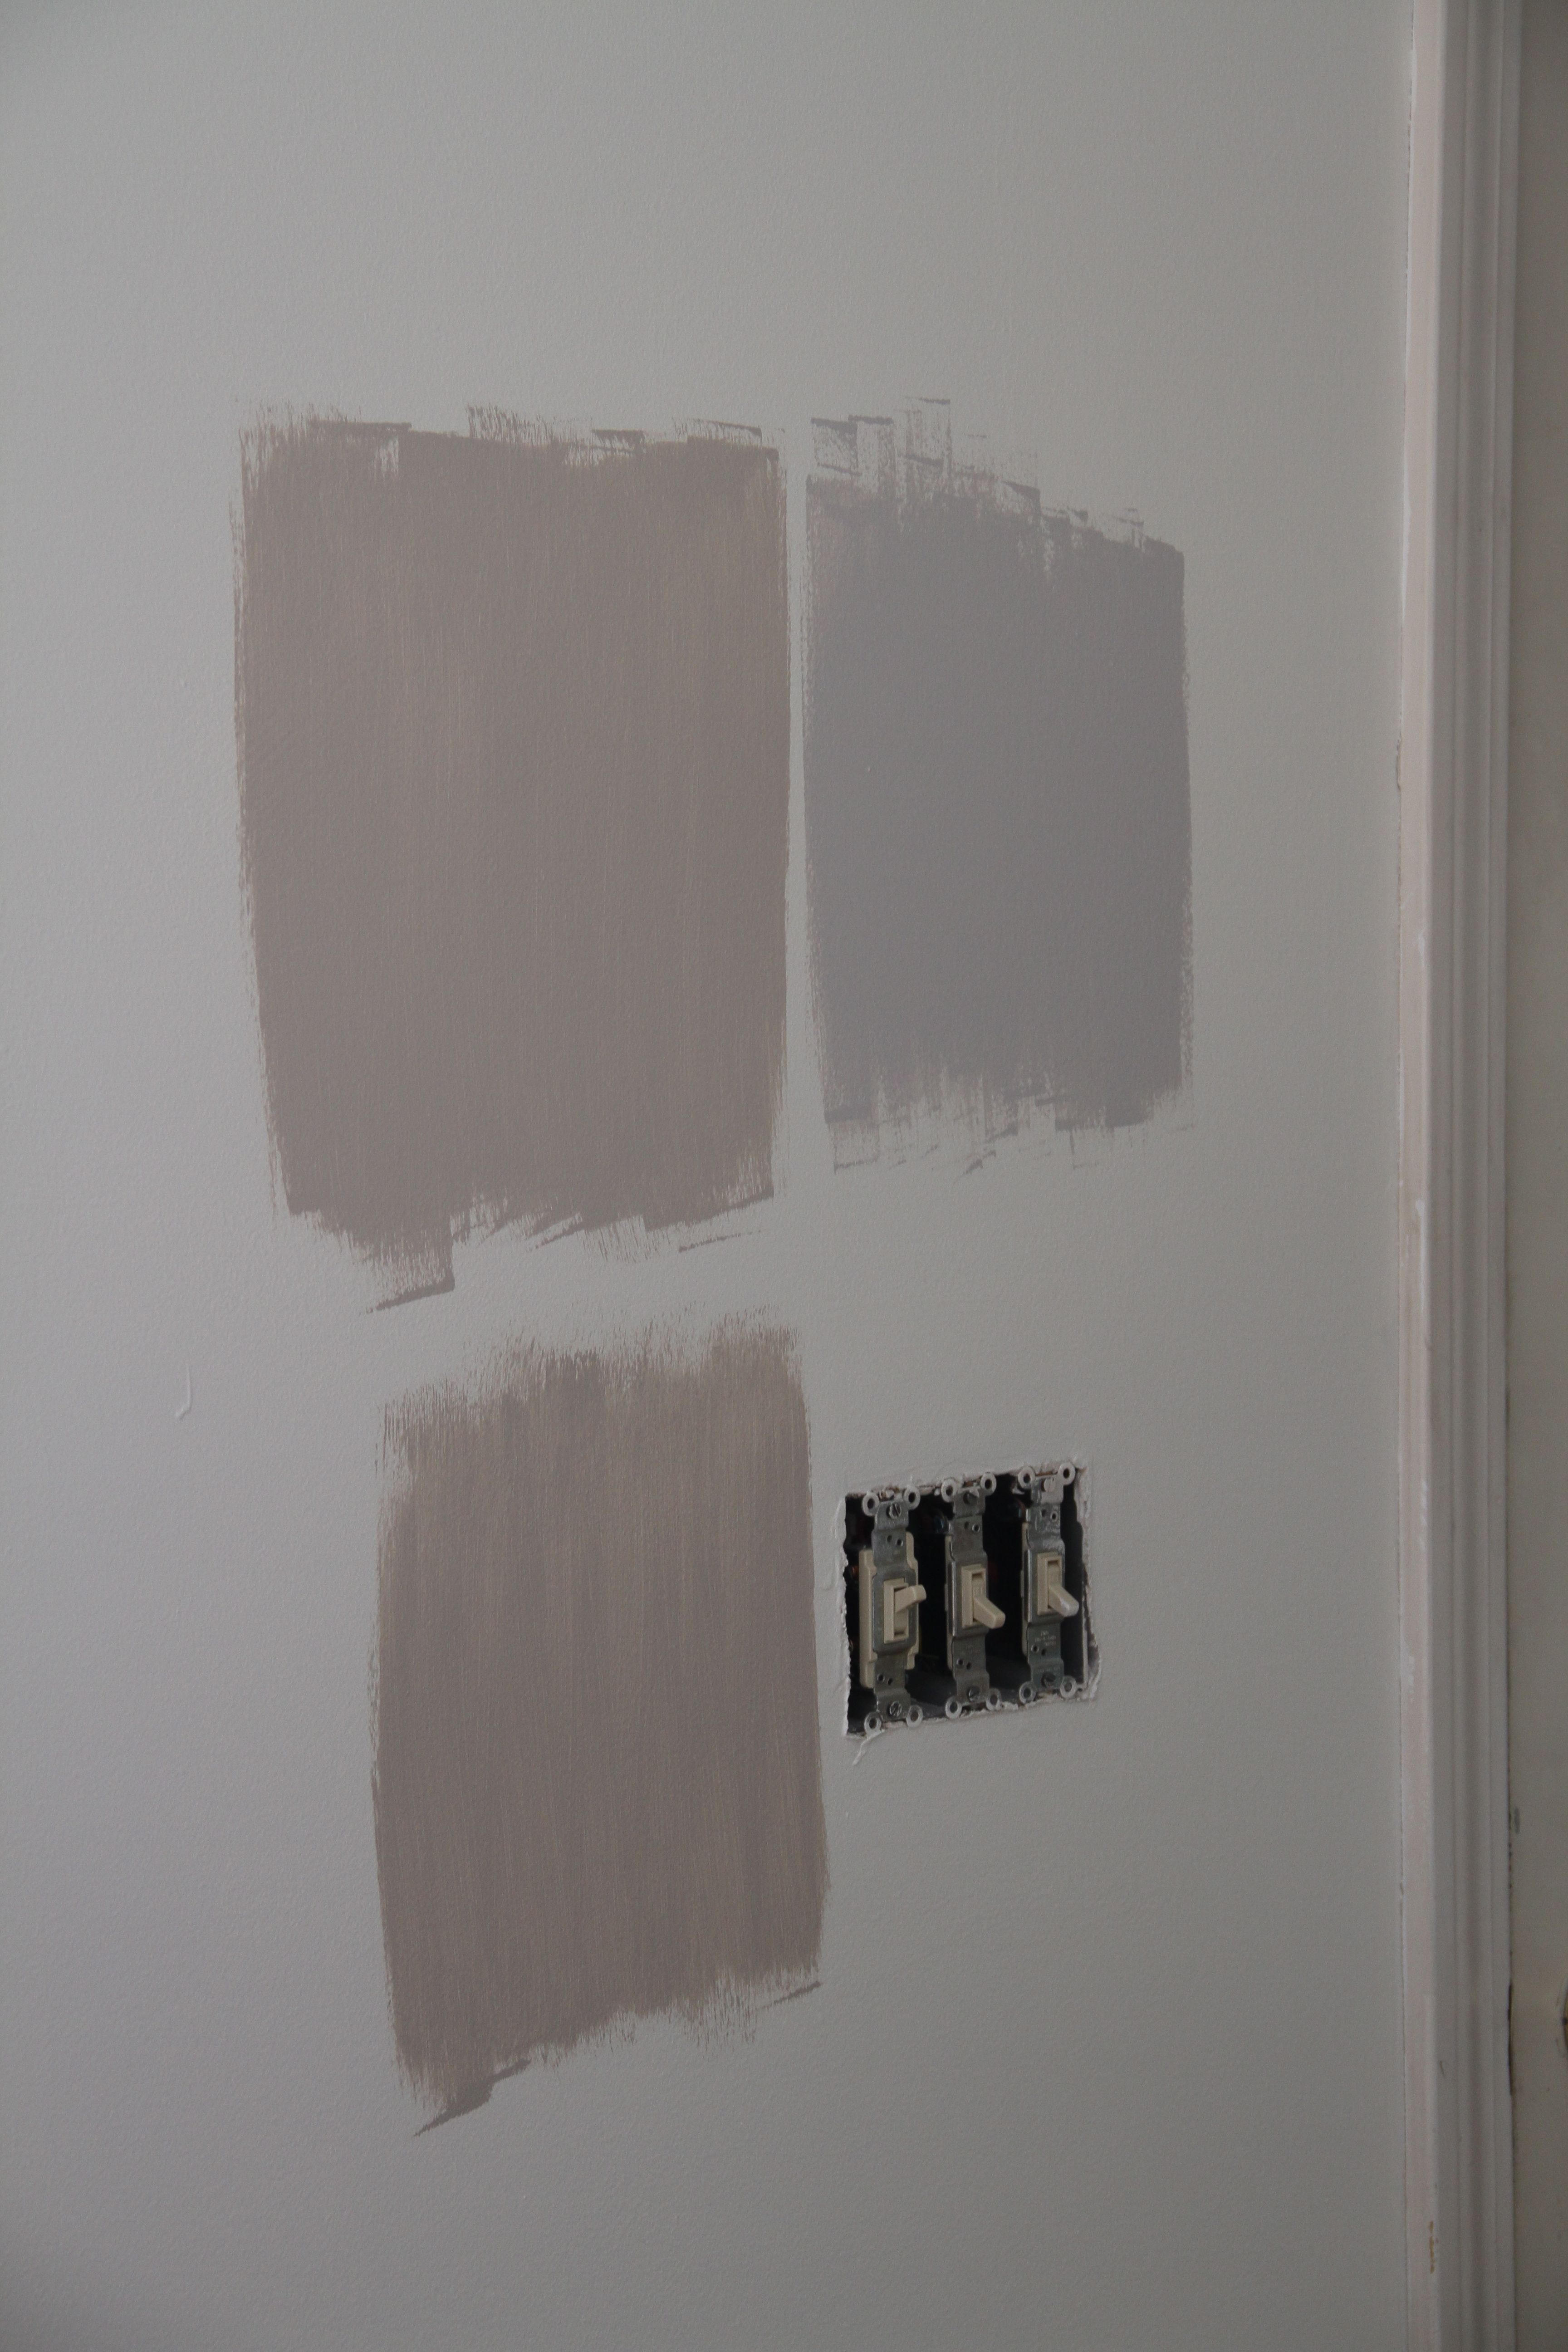 Condo: paint colors were sampled. We arrived at the grey-ish one on the upper right for the living space.